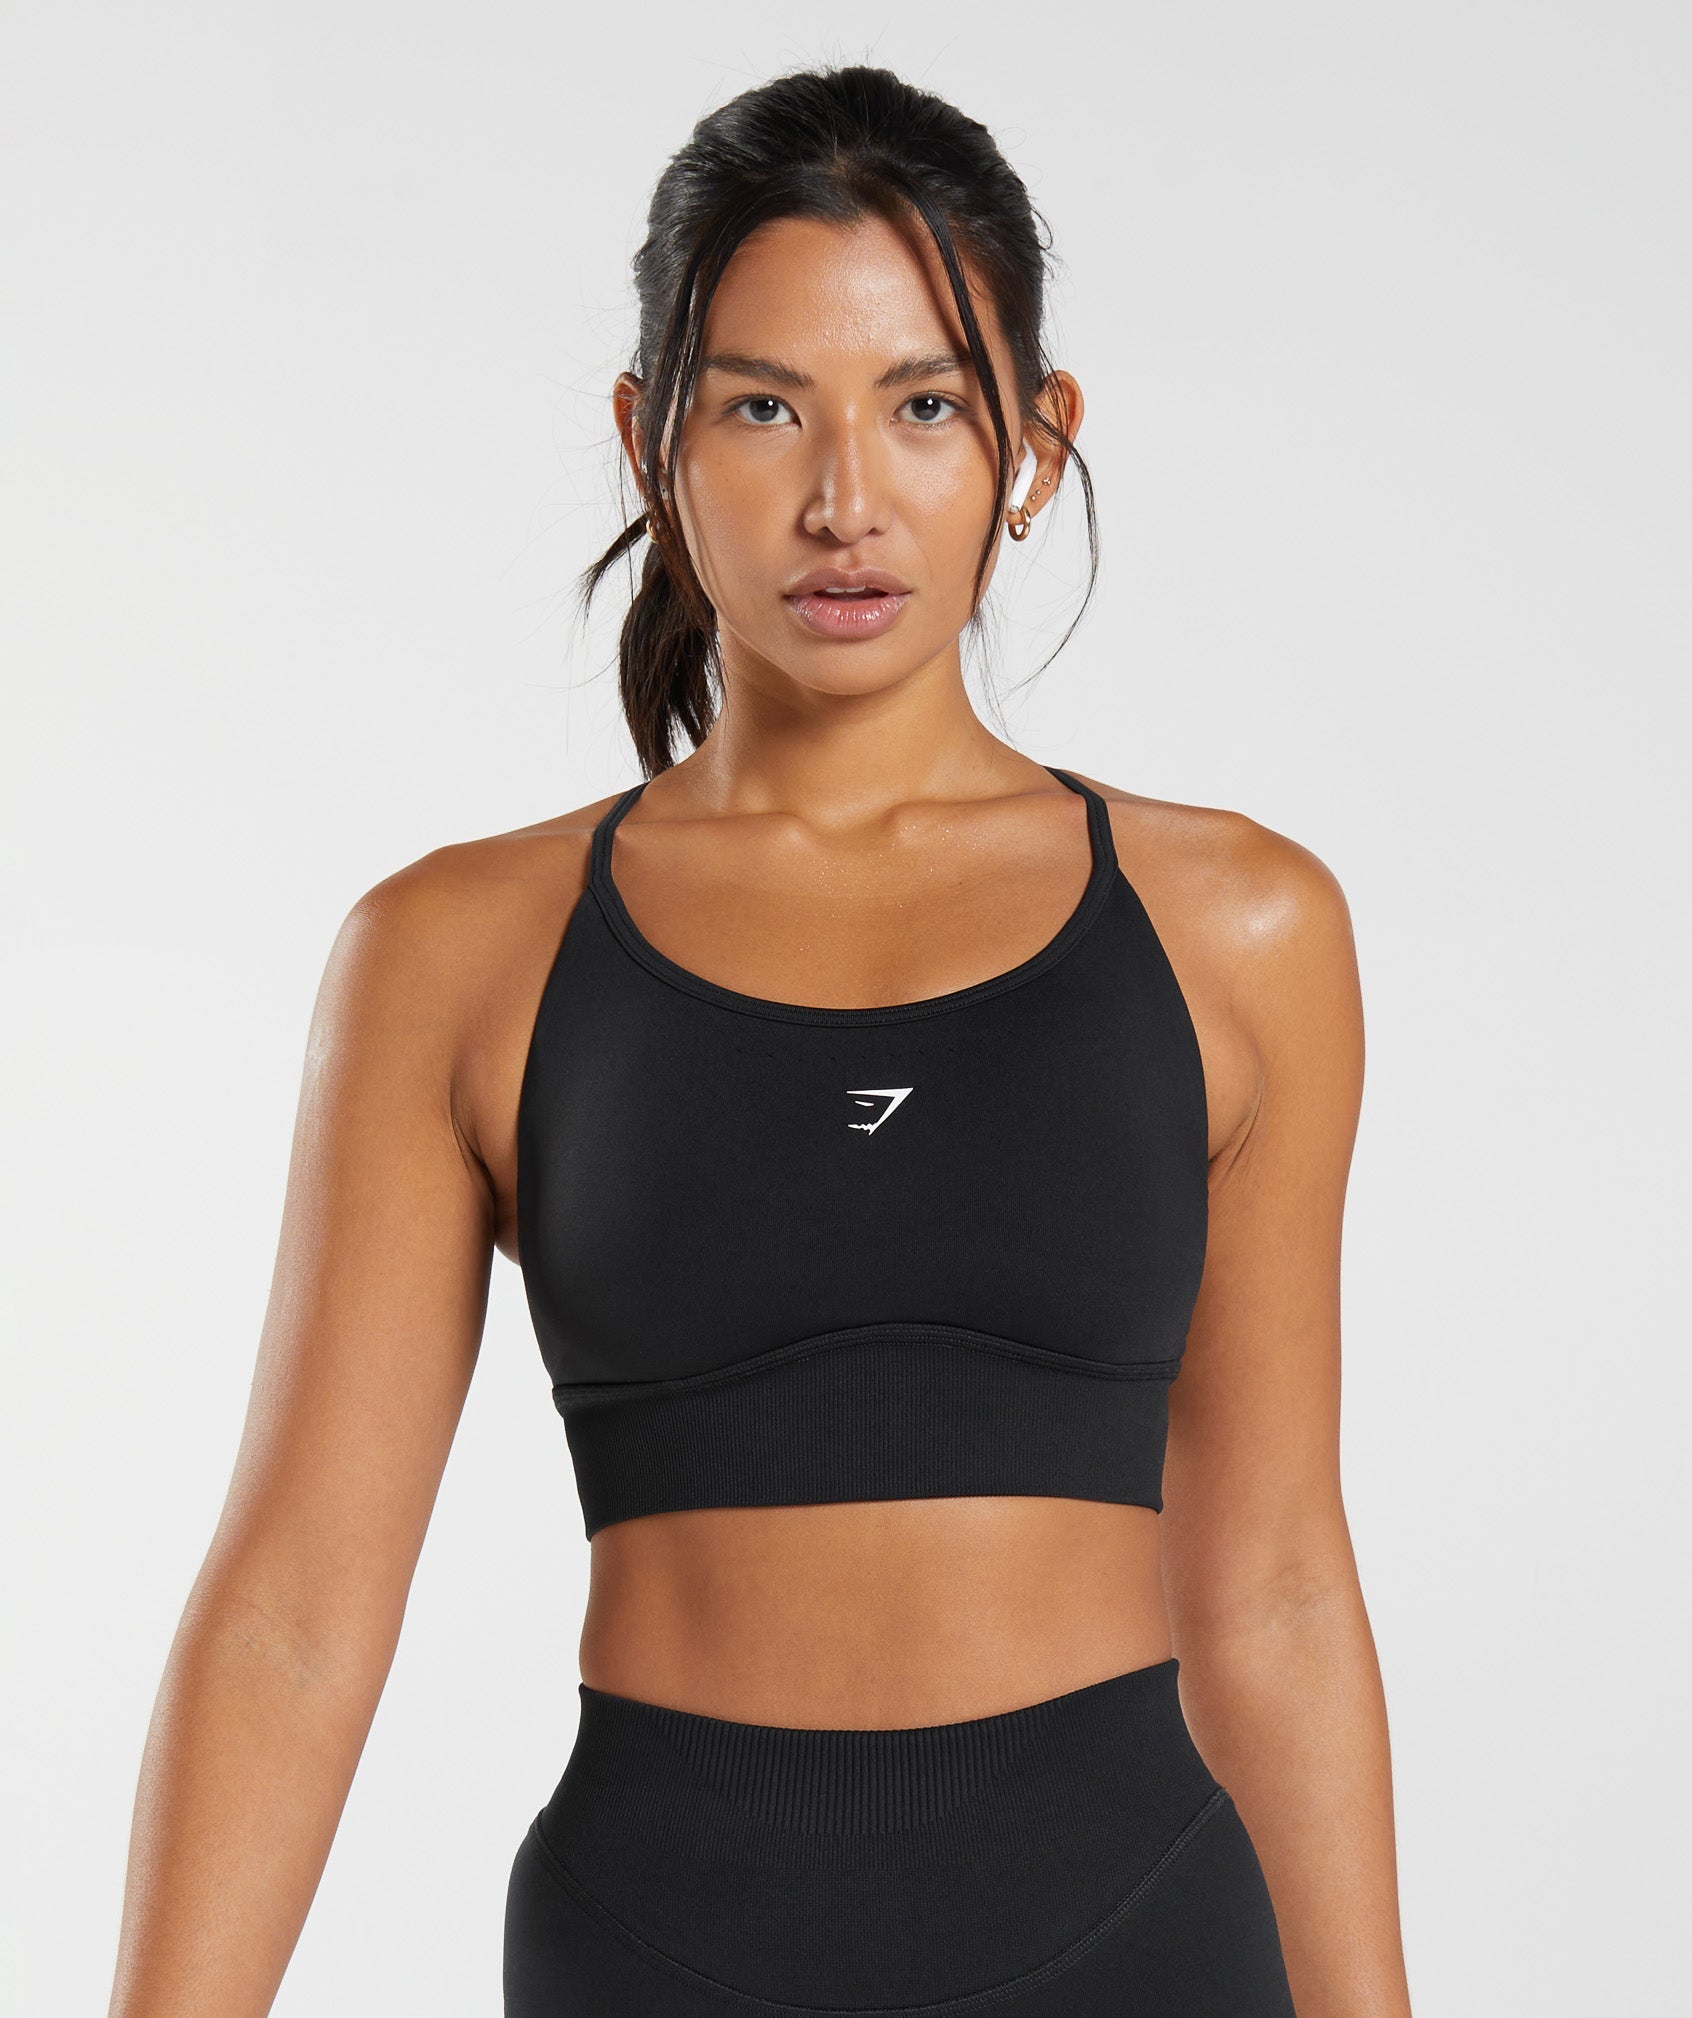 Gymshark Elevate Longline Sports Bra Assorted Colors And Sizes New In Bag